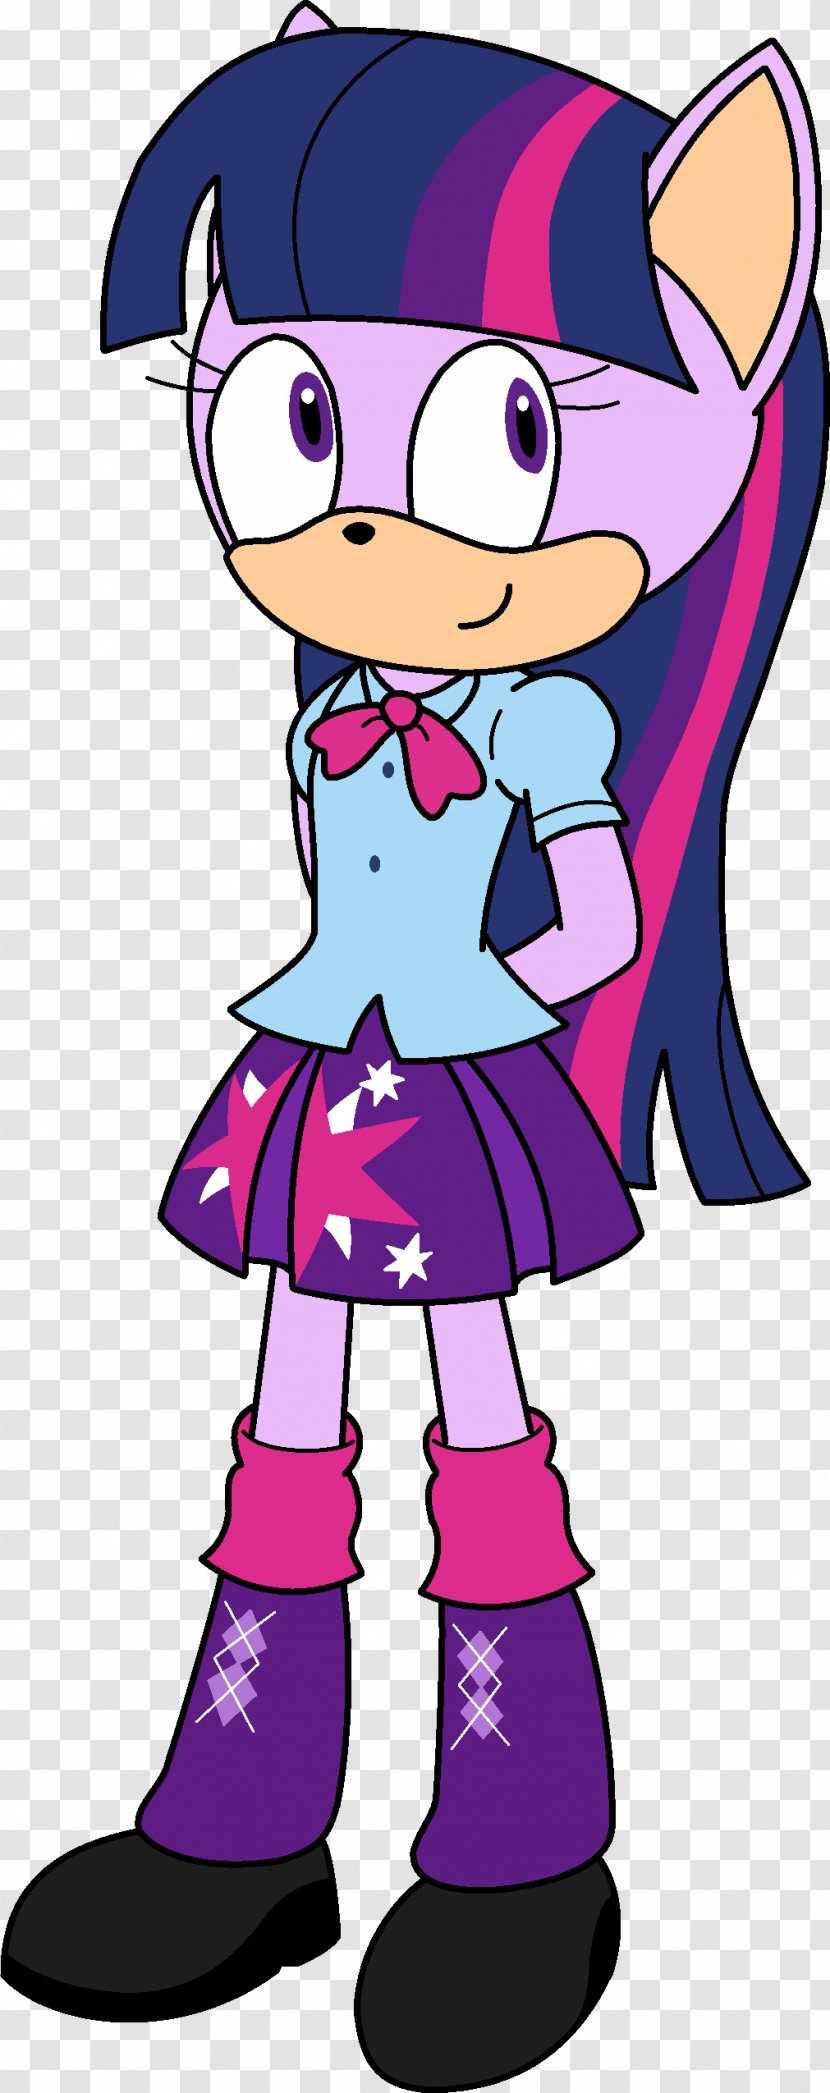 Twilight Sparkle Sonic Classic Collection Free Riders Rarity Amy Rose - Art - Deviantart Transparent PNG